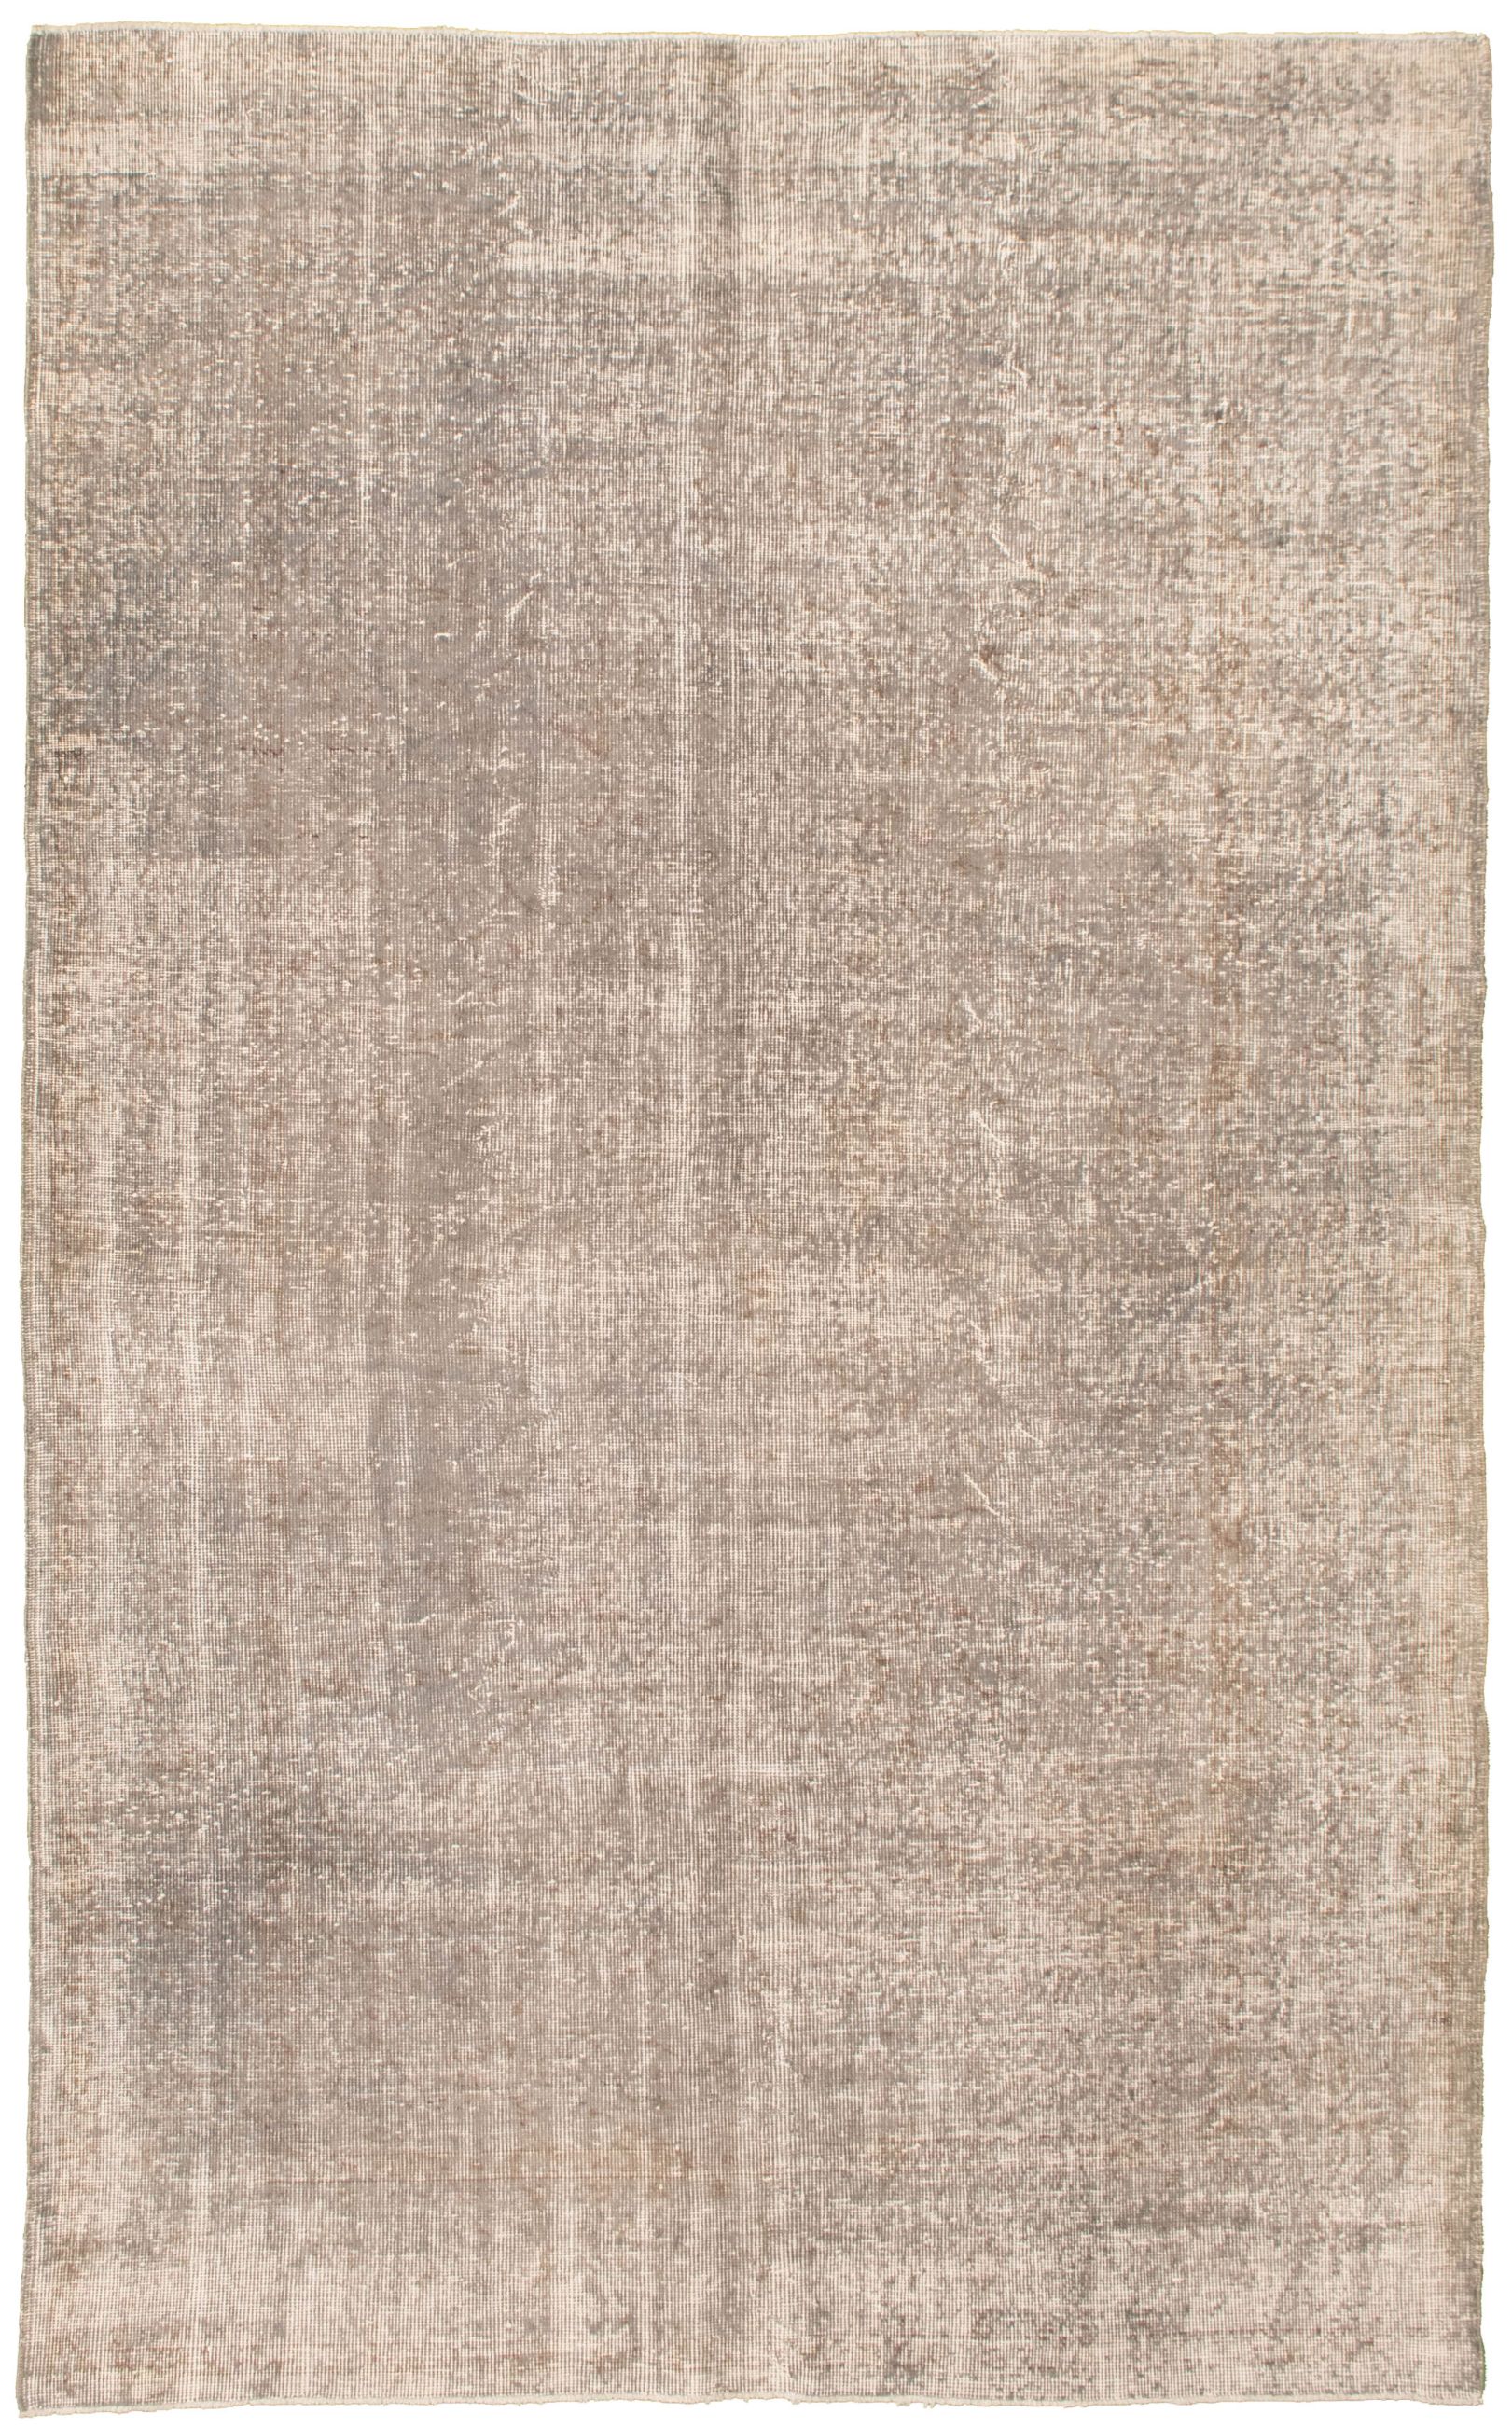 Hand-knotted Color Transition Light Grey Wool Rug 5'8" x 9'6"  Size: 5'8" x 9'6"  